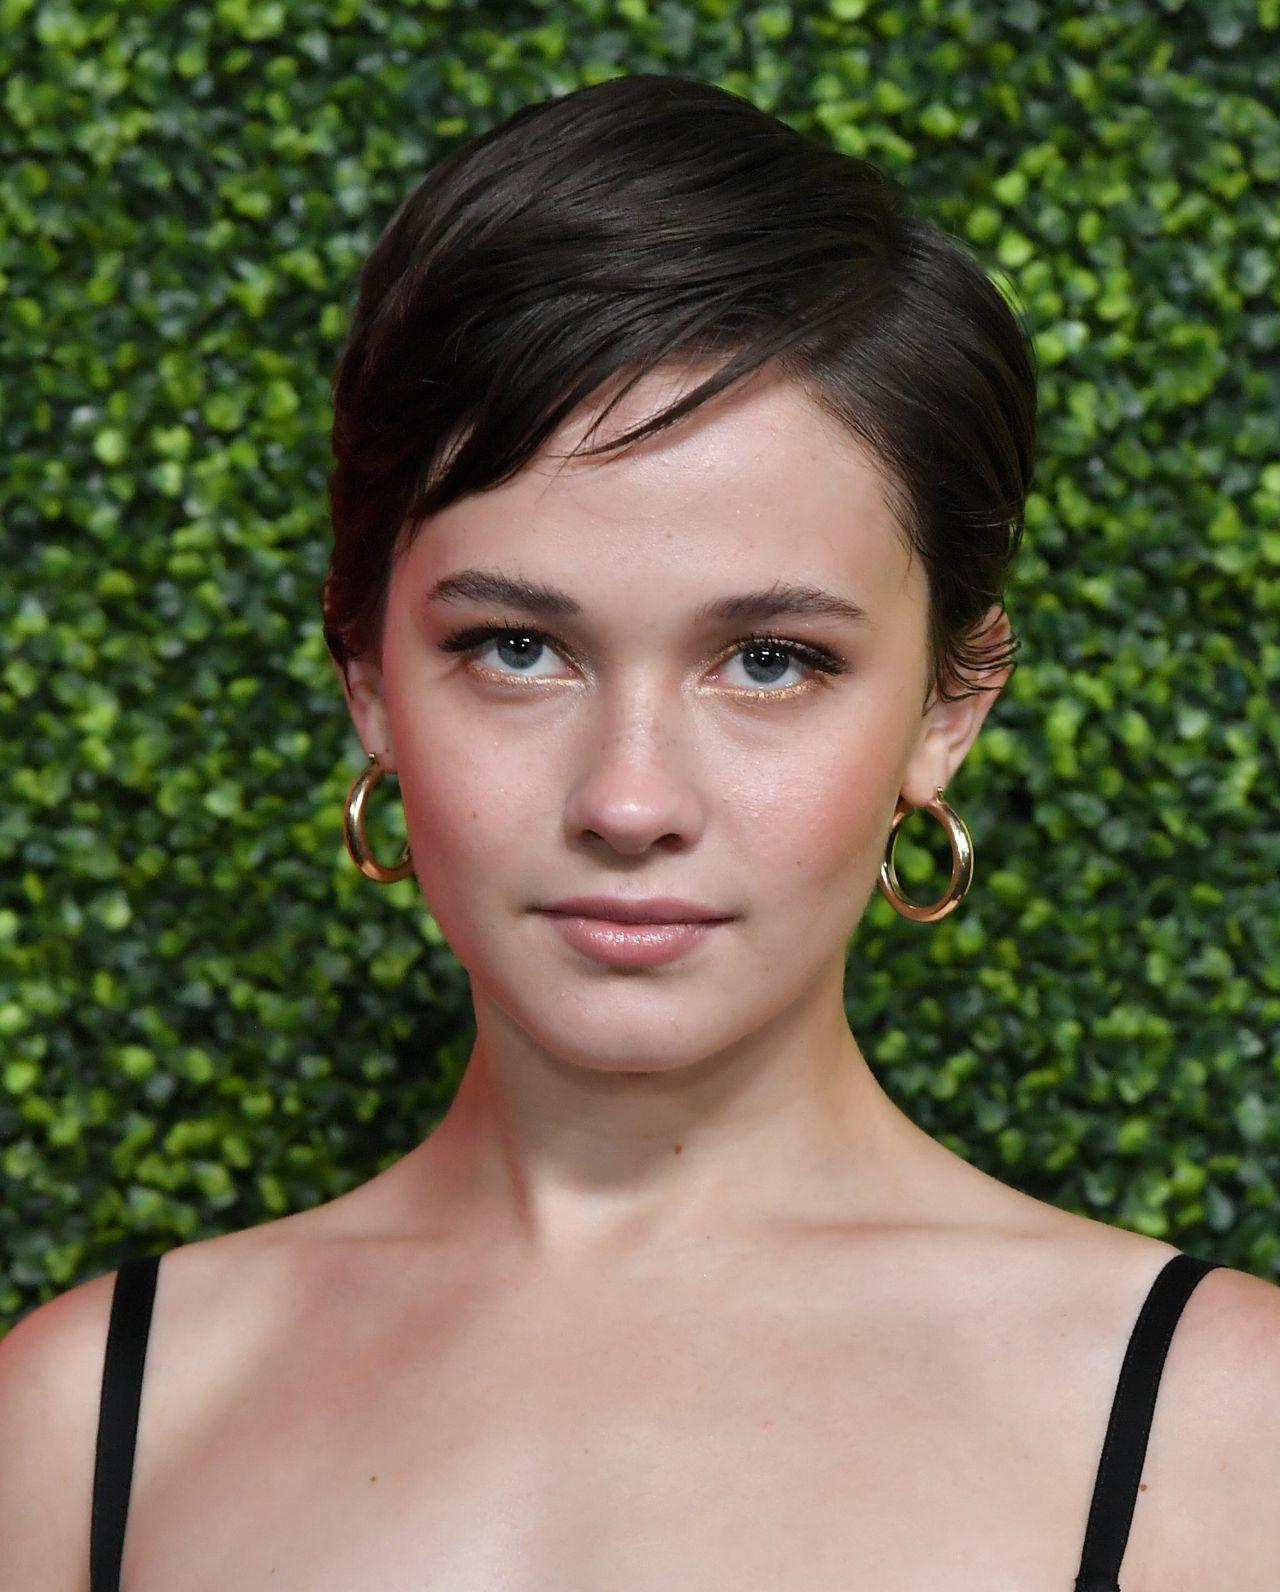 Cailee Spaeny 2019 Wallpapers